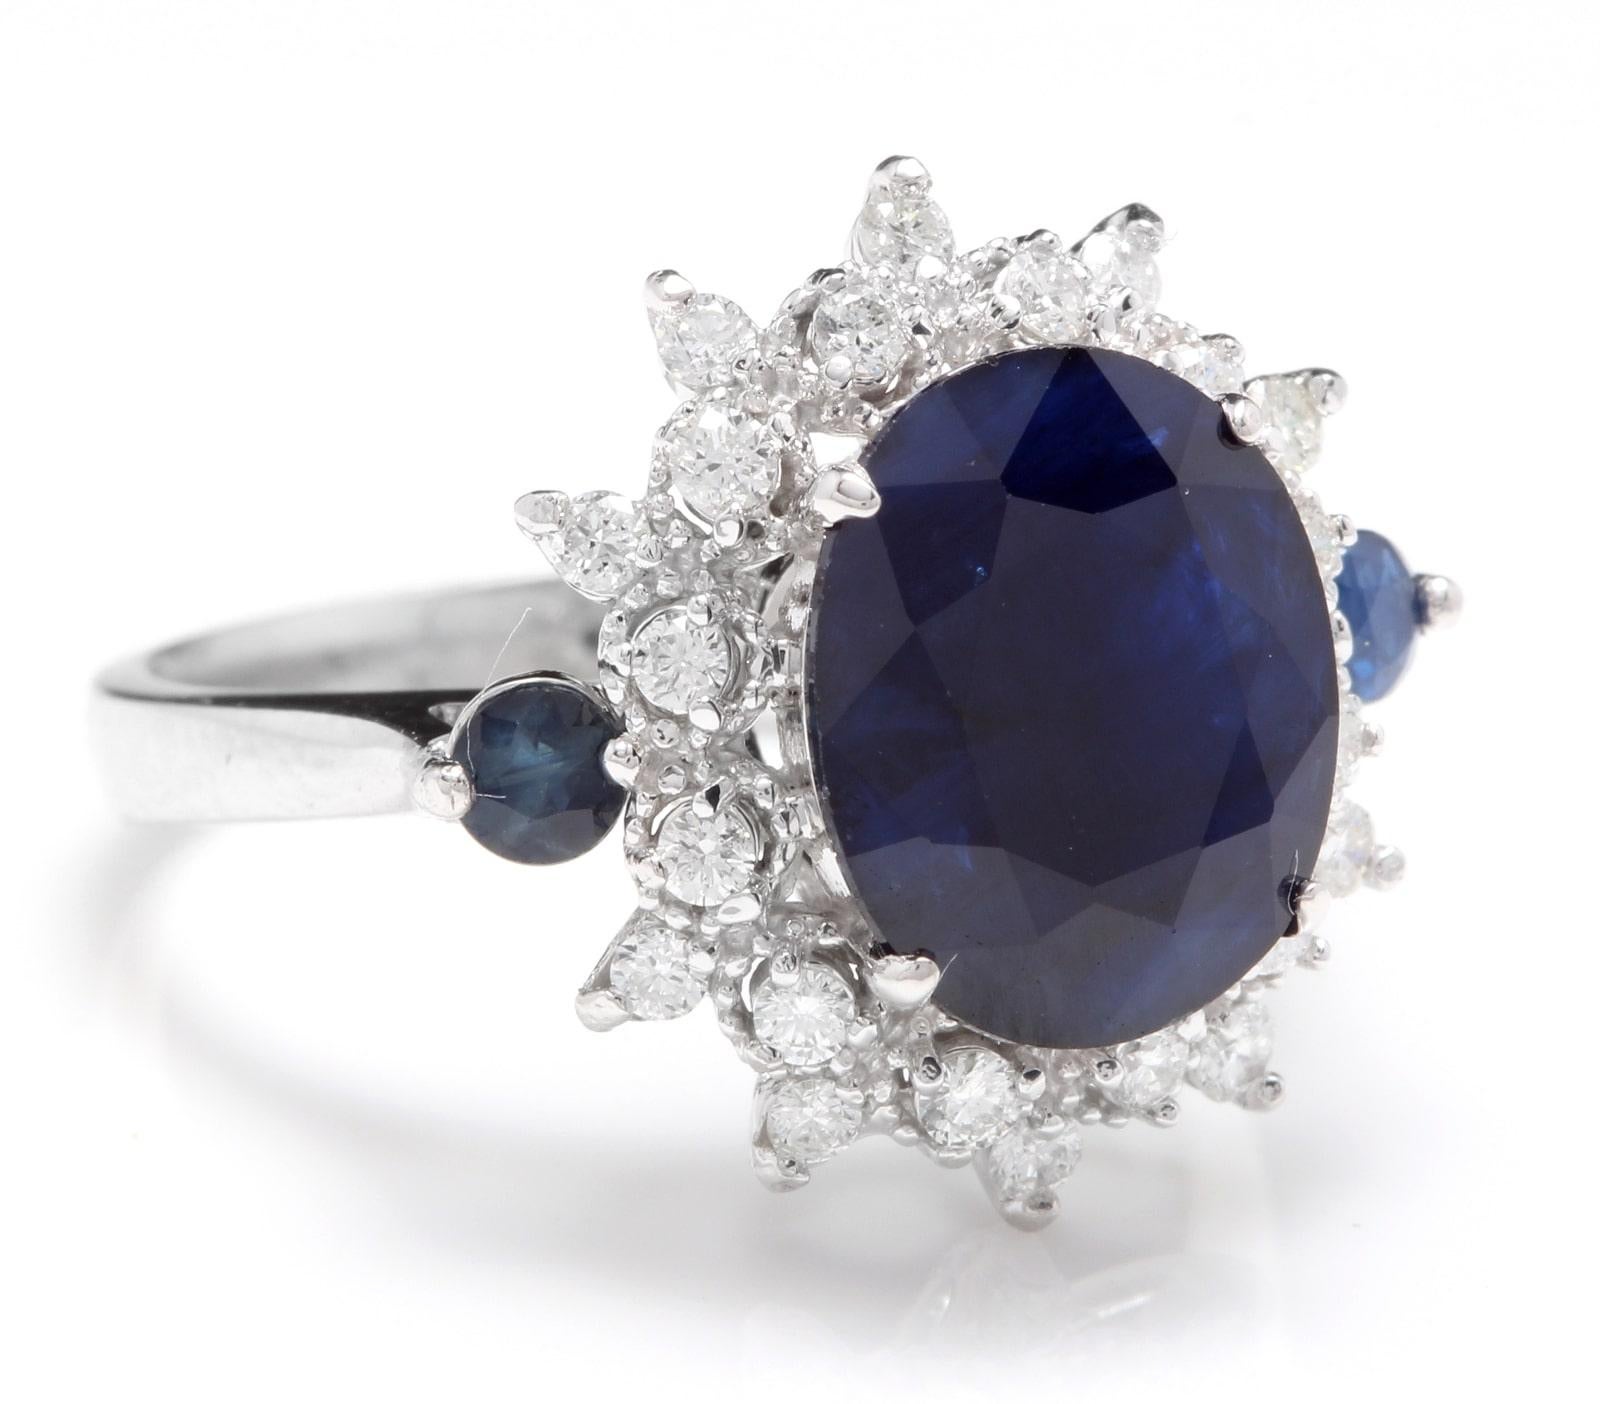 5.50 Carats Exquisite Natural Blue Sapphire and Diamond 14K Solid White Gold Ring

Suggested Replacement Value $5,300.00

Total Natural Blue Sapphire Weights: Approx. 5.00 Carats 

Sapphire Measures: 11 x 9.00mm

Natural Round Diamonds Weight: .50